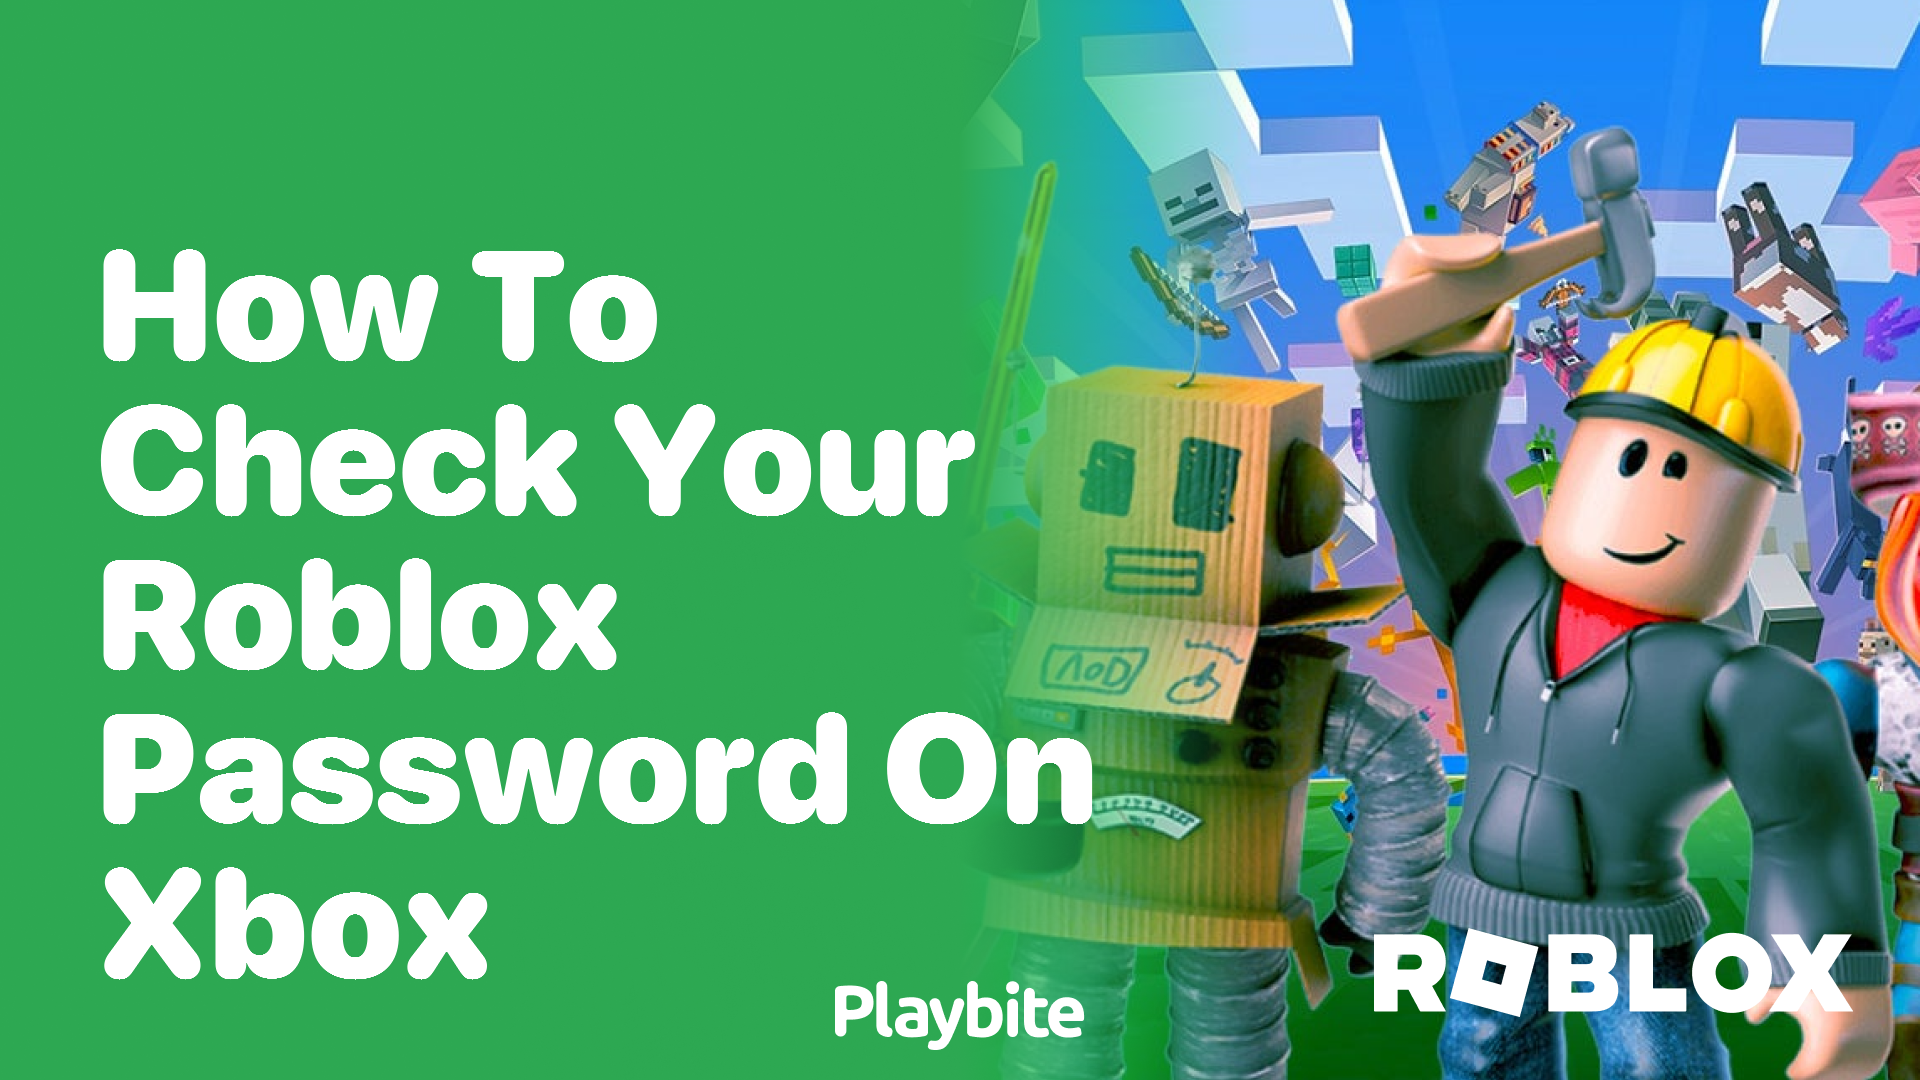 How to Check Your Roblox Password on Xbox